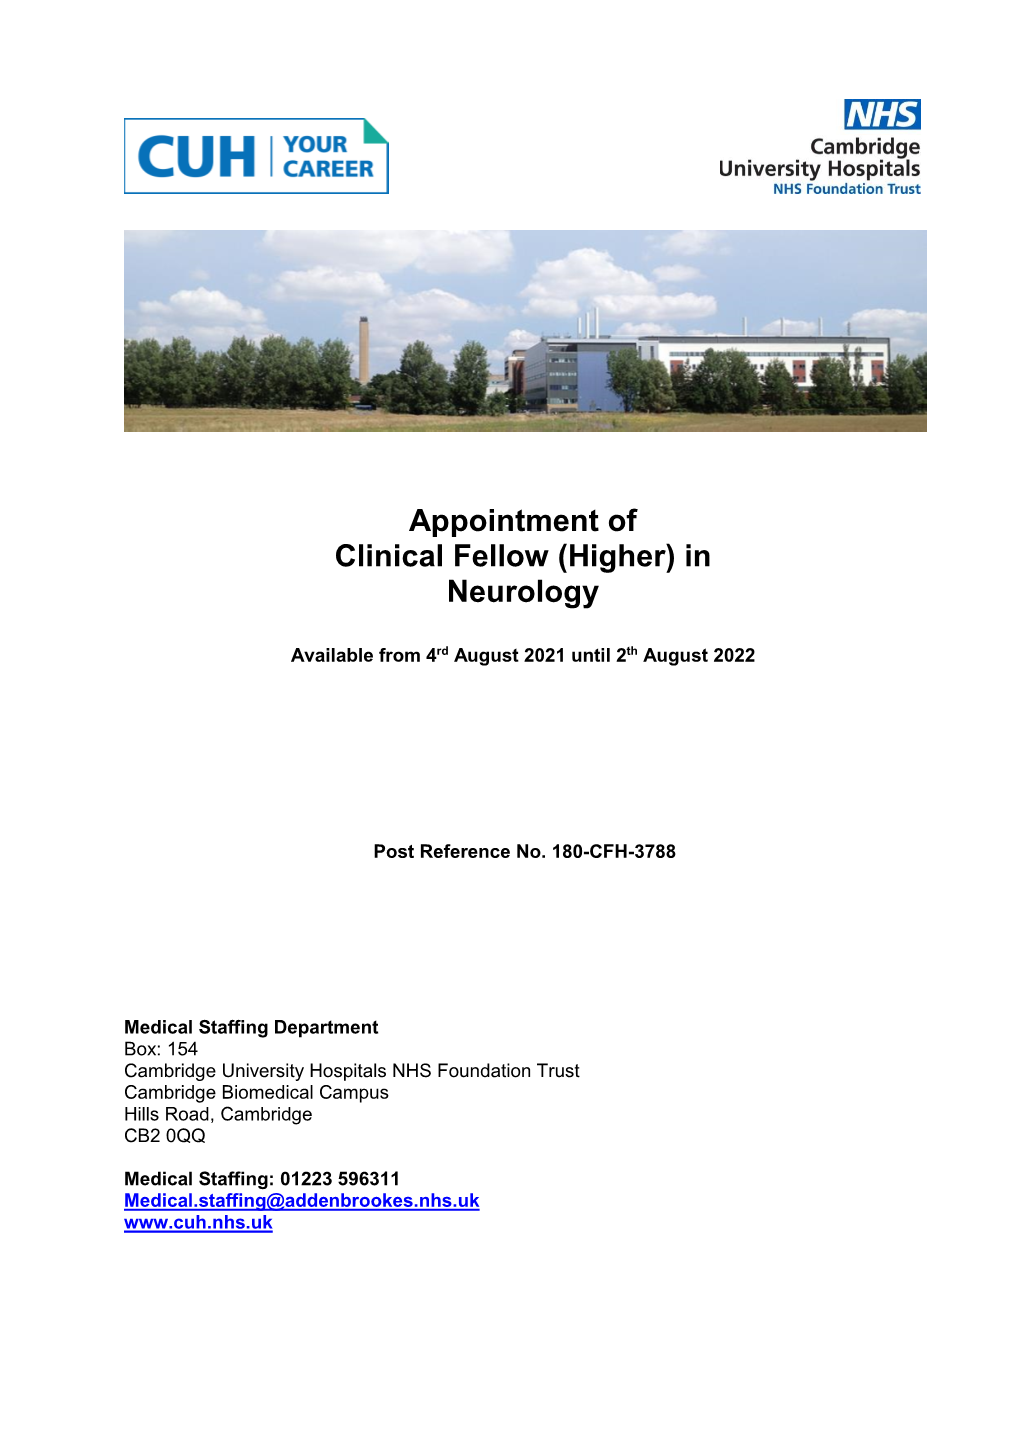 Appointment of Clinical Fellow (Higher) in Neurology